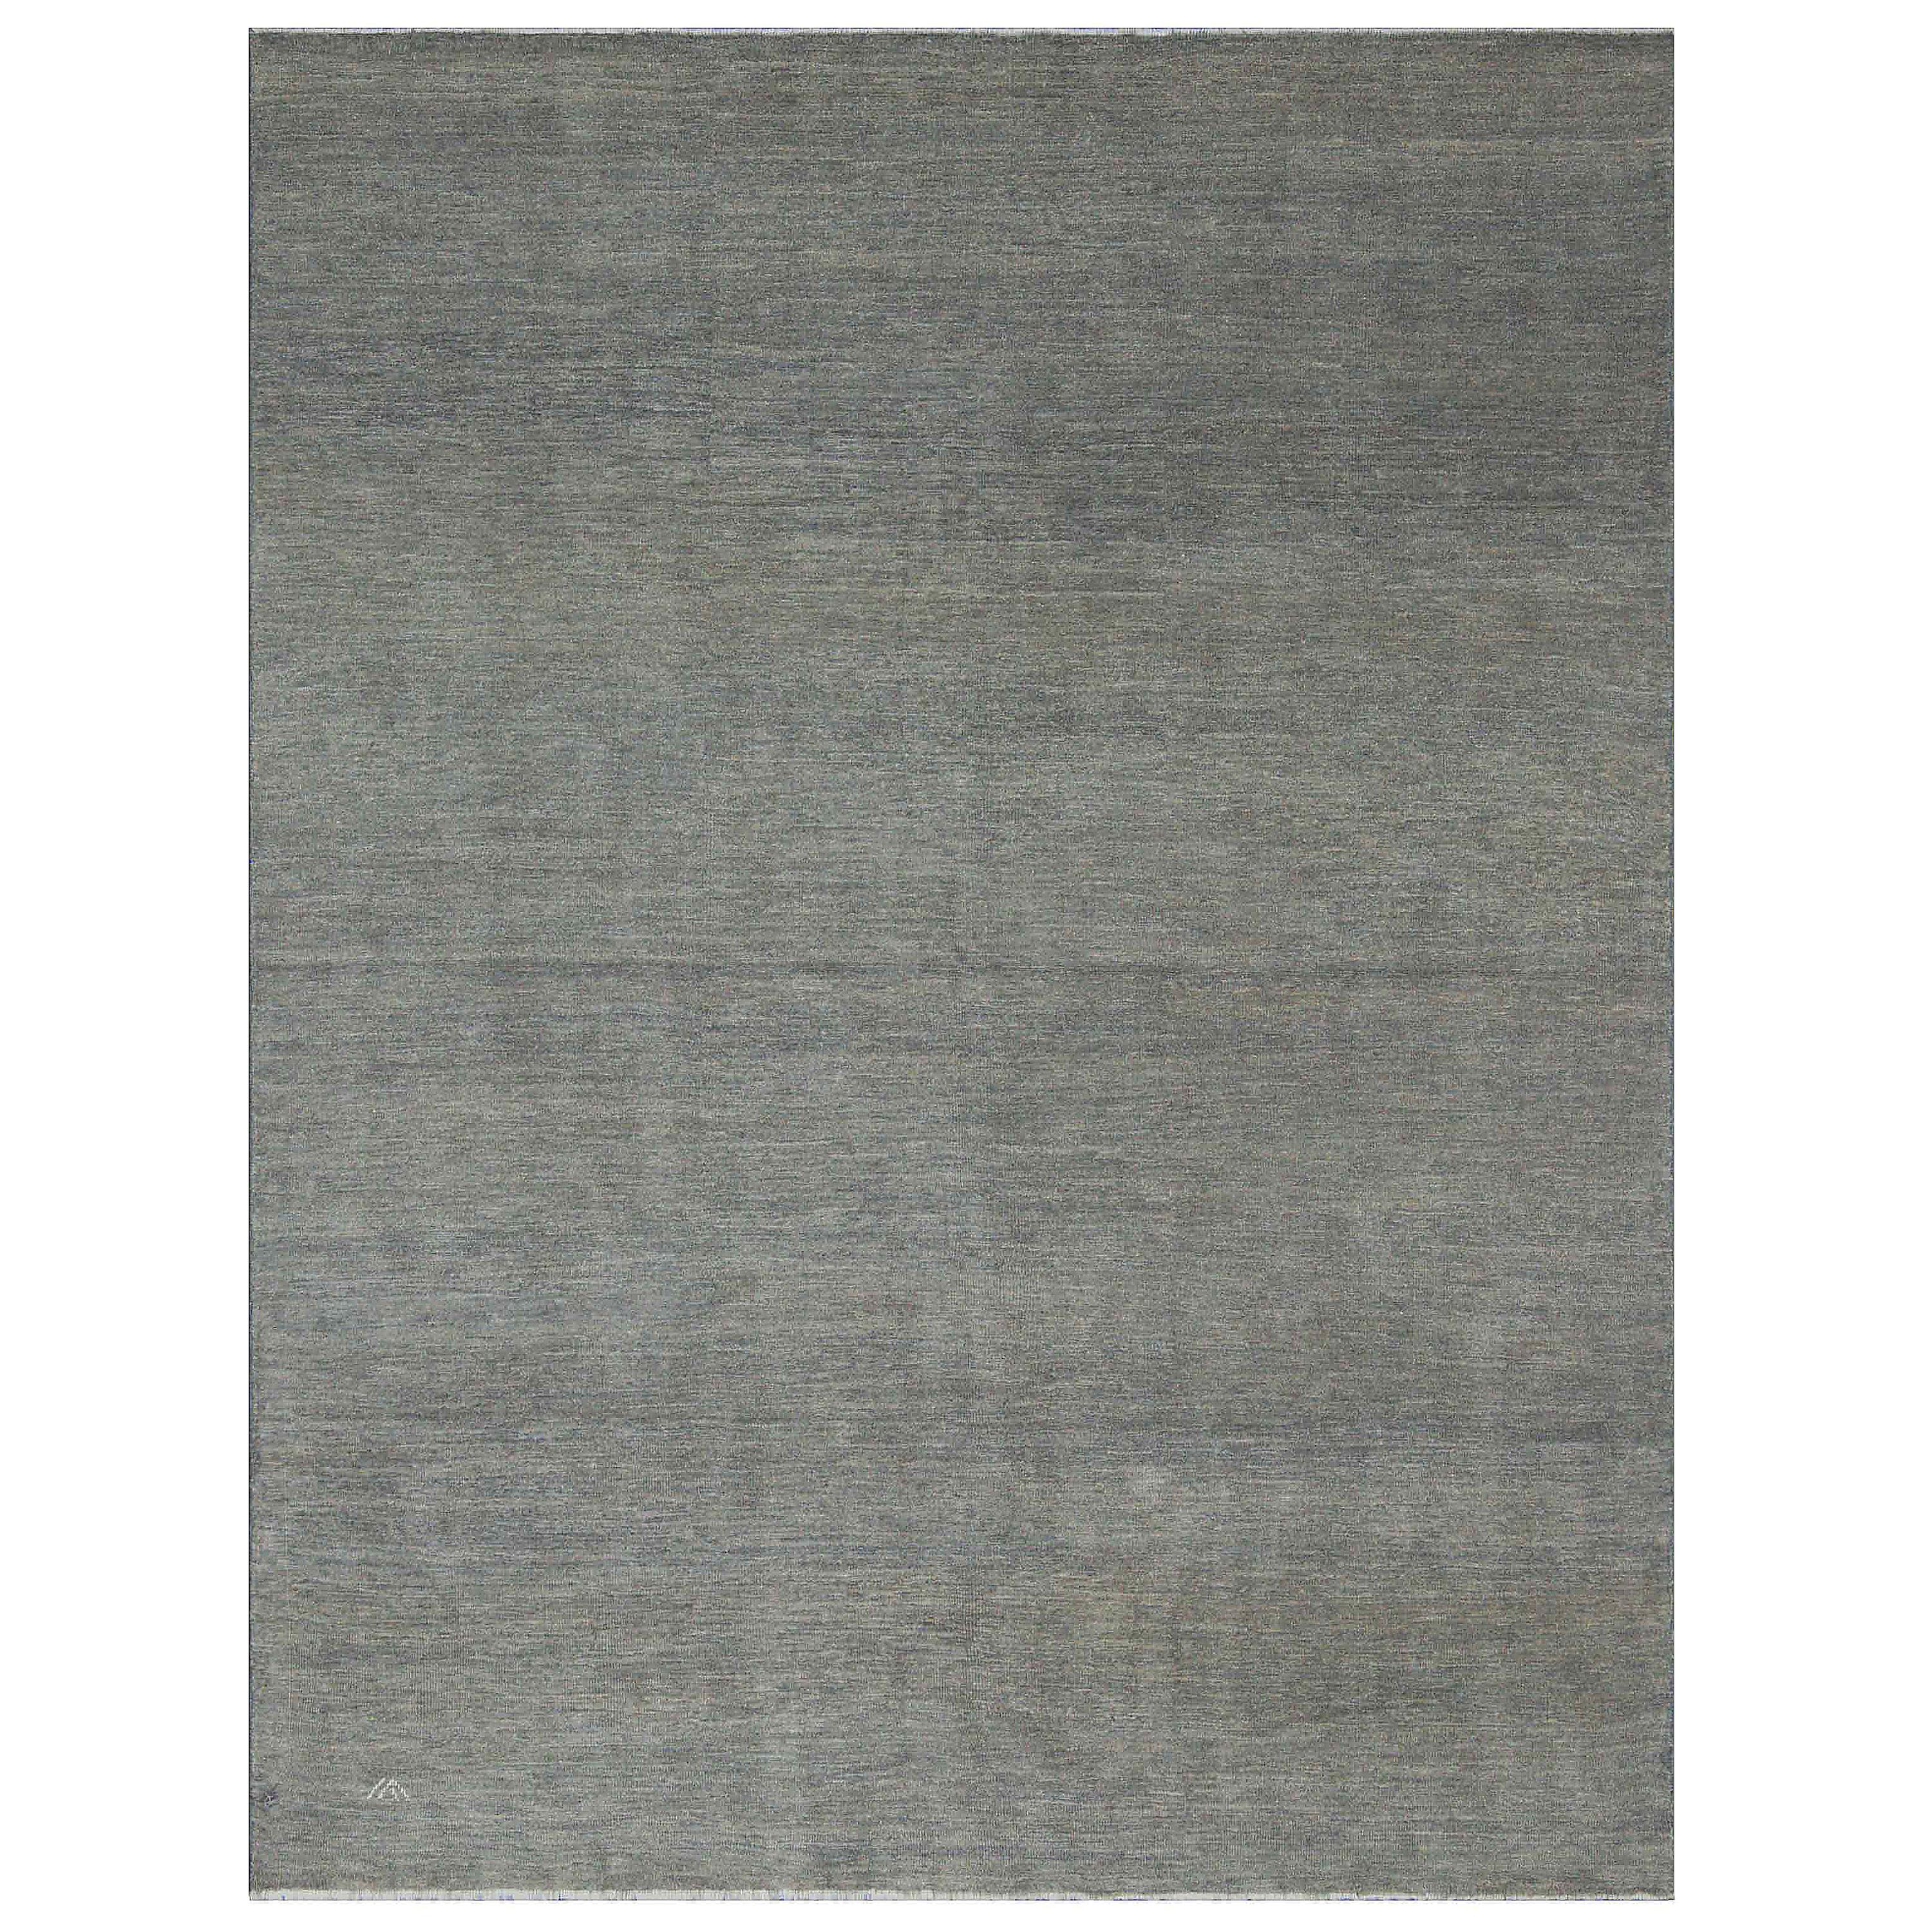 Modern Oushak Rug with Unique ‘Invisible’ Floral Details in Gray on Beige Field